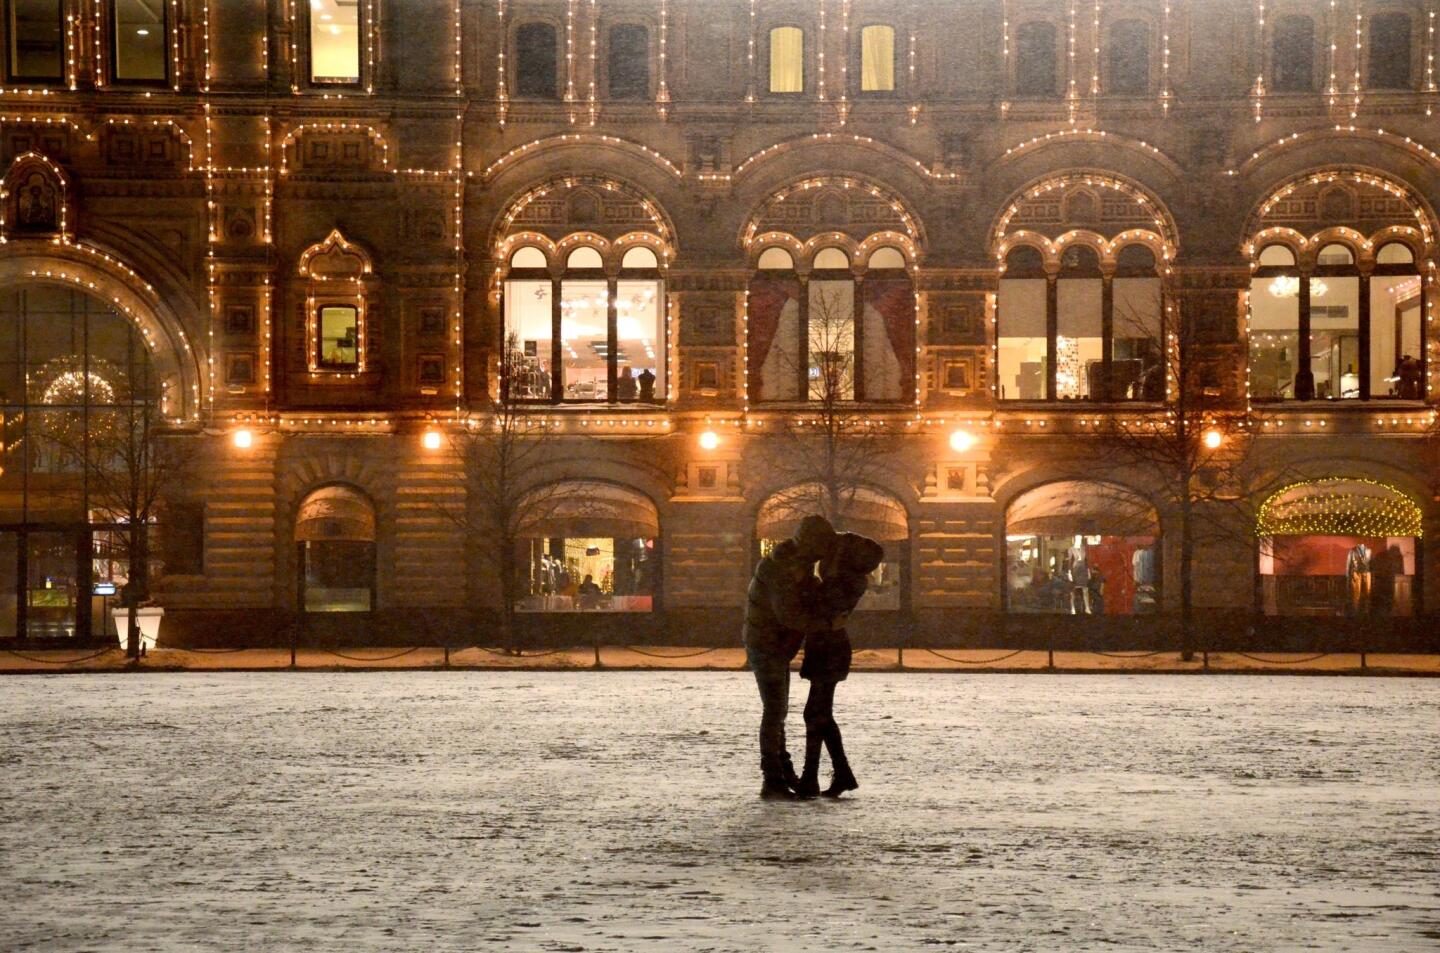 A couple embraces outside GUM, an arcade-style, three-level shopping center on Red Square that is housed in an 1890s structure.